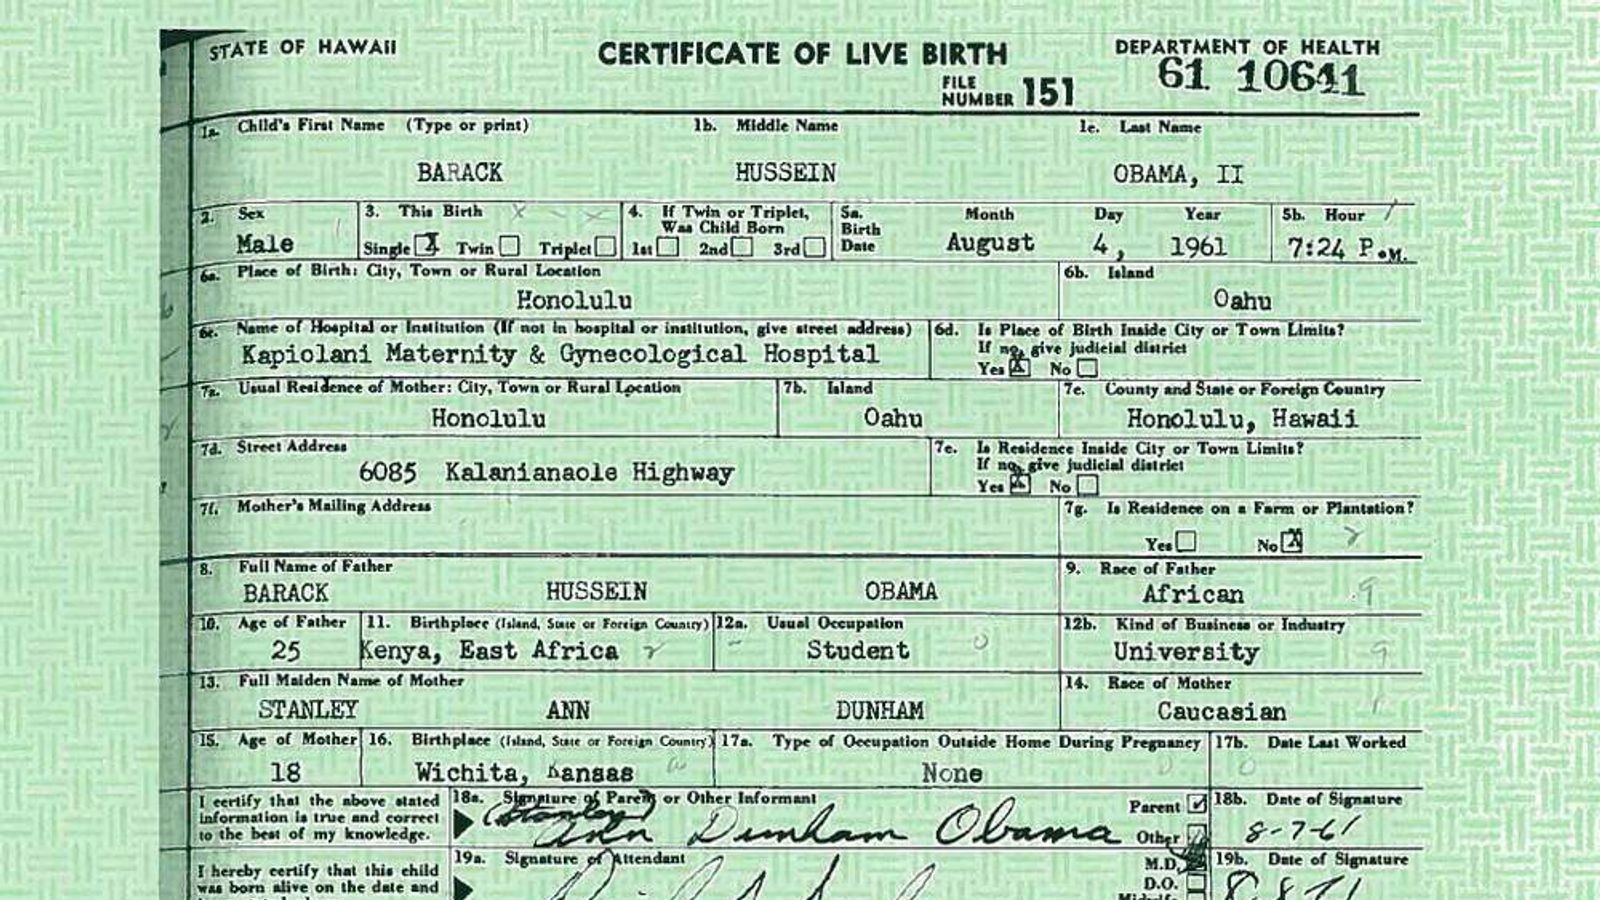 Mr Obama issued his birth certificate over claims he was not American. 